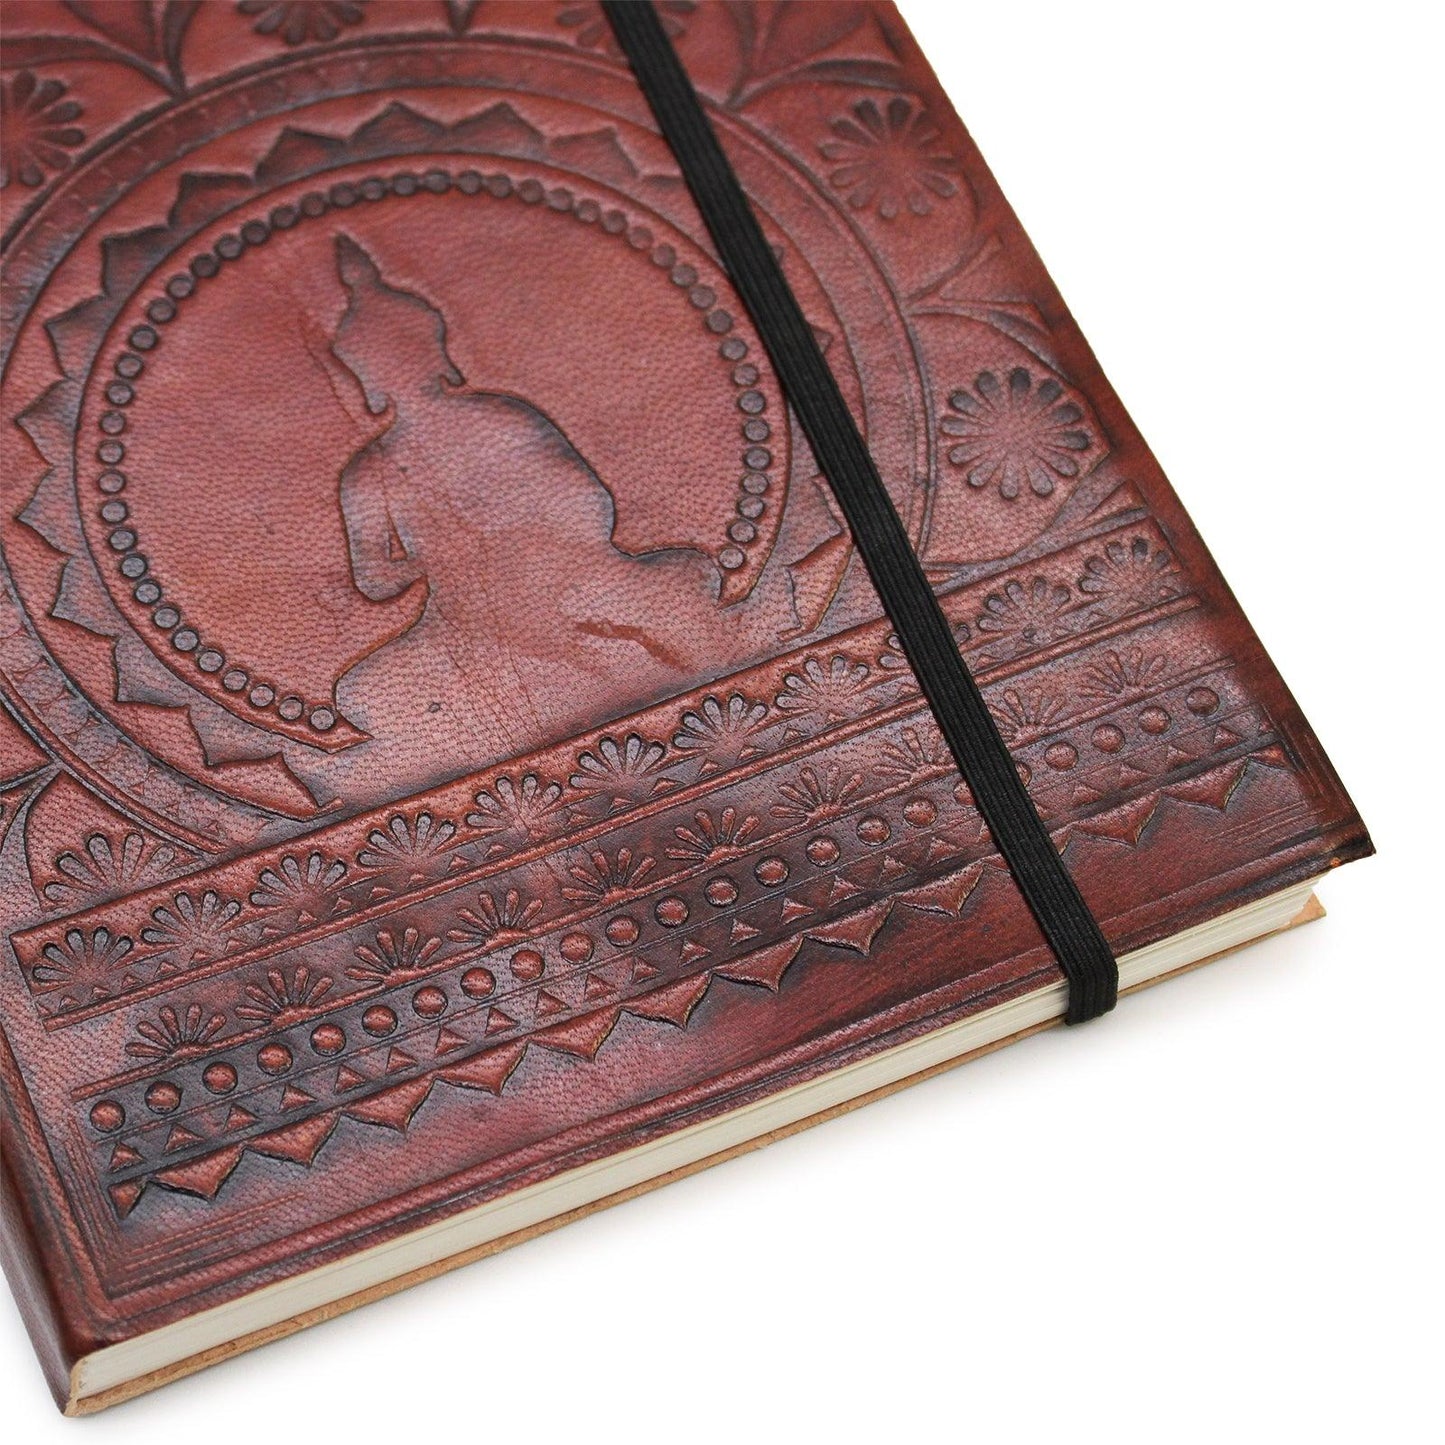 Small Notebook with strap - Tibetan Mandala - DuvetDay.co.uk